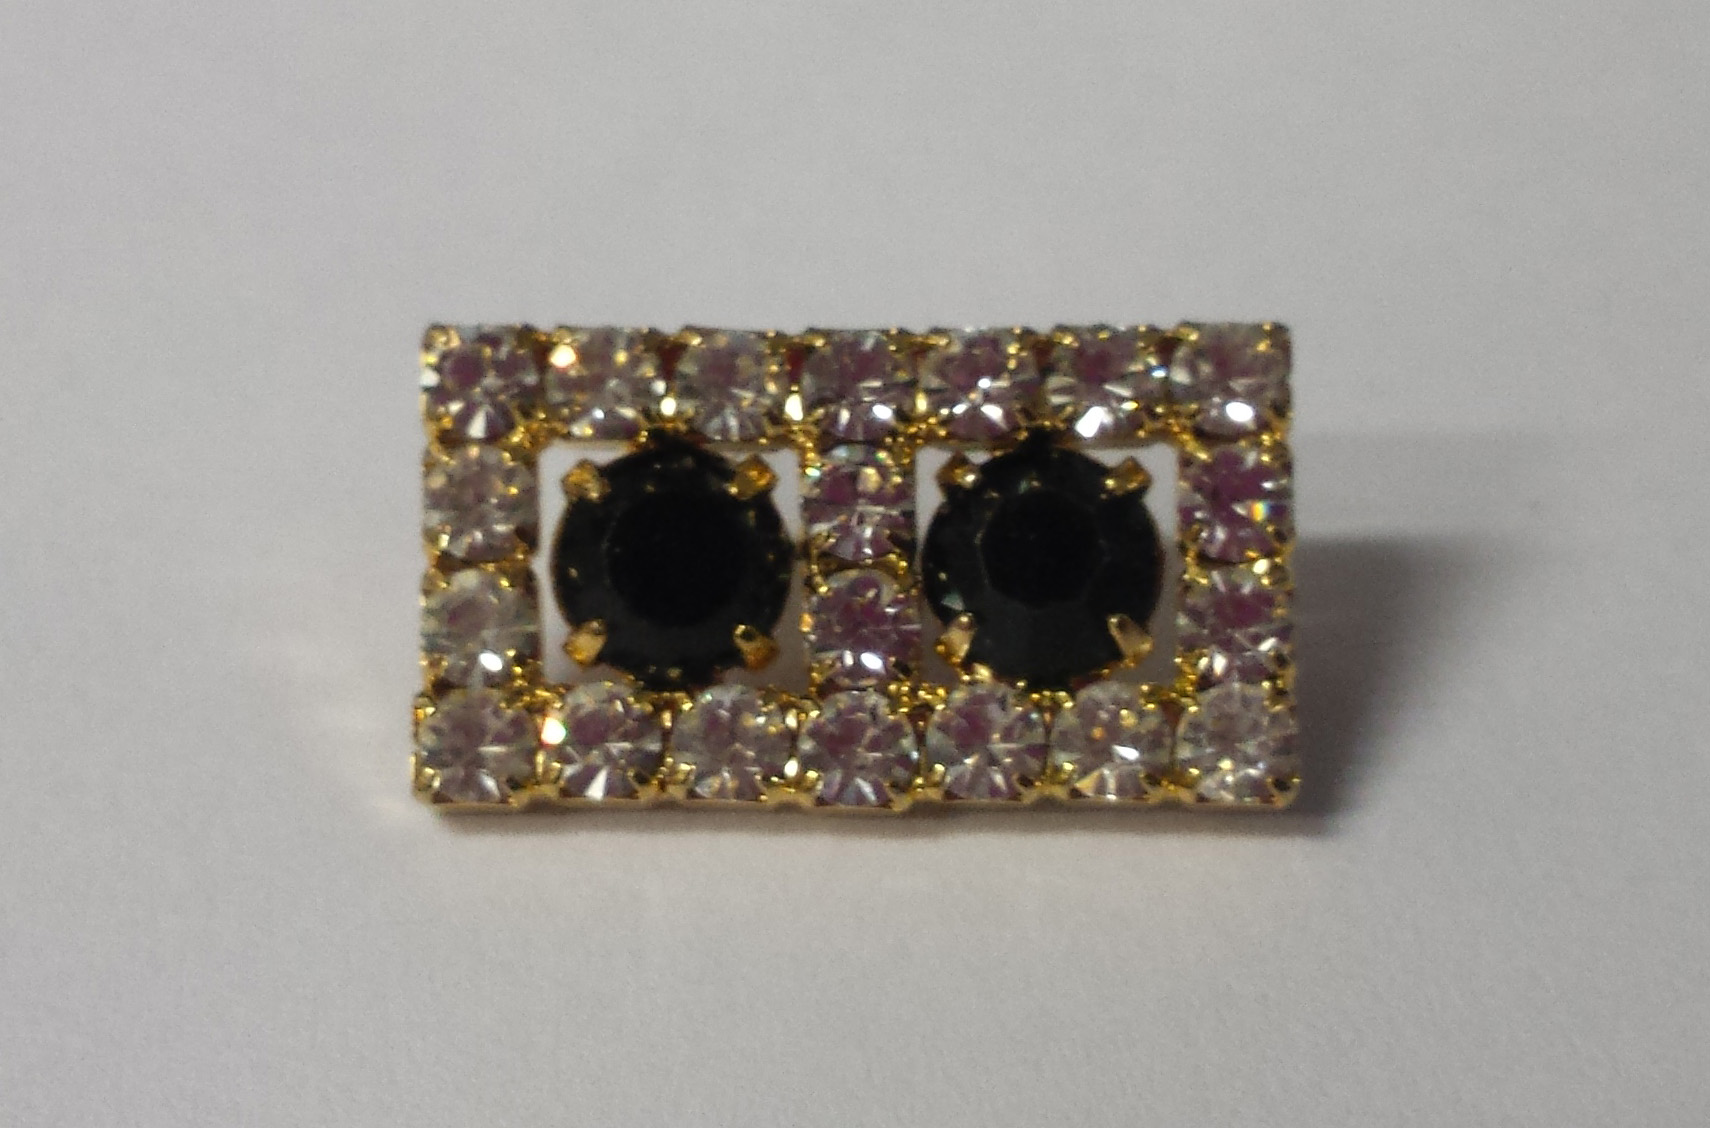 Dazzling Rectangular Rhinestone Button Crystal and Black with Gold Backs - 1 1/8 inch by 5/8 inch #Daz0010